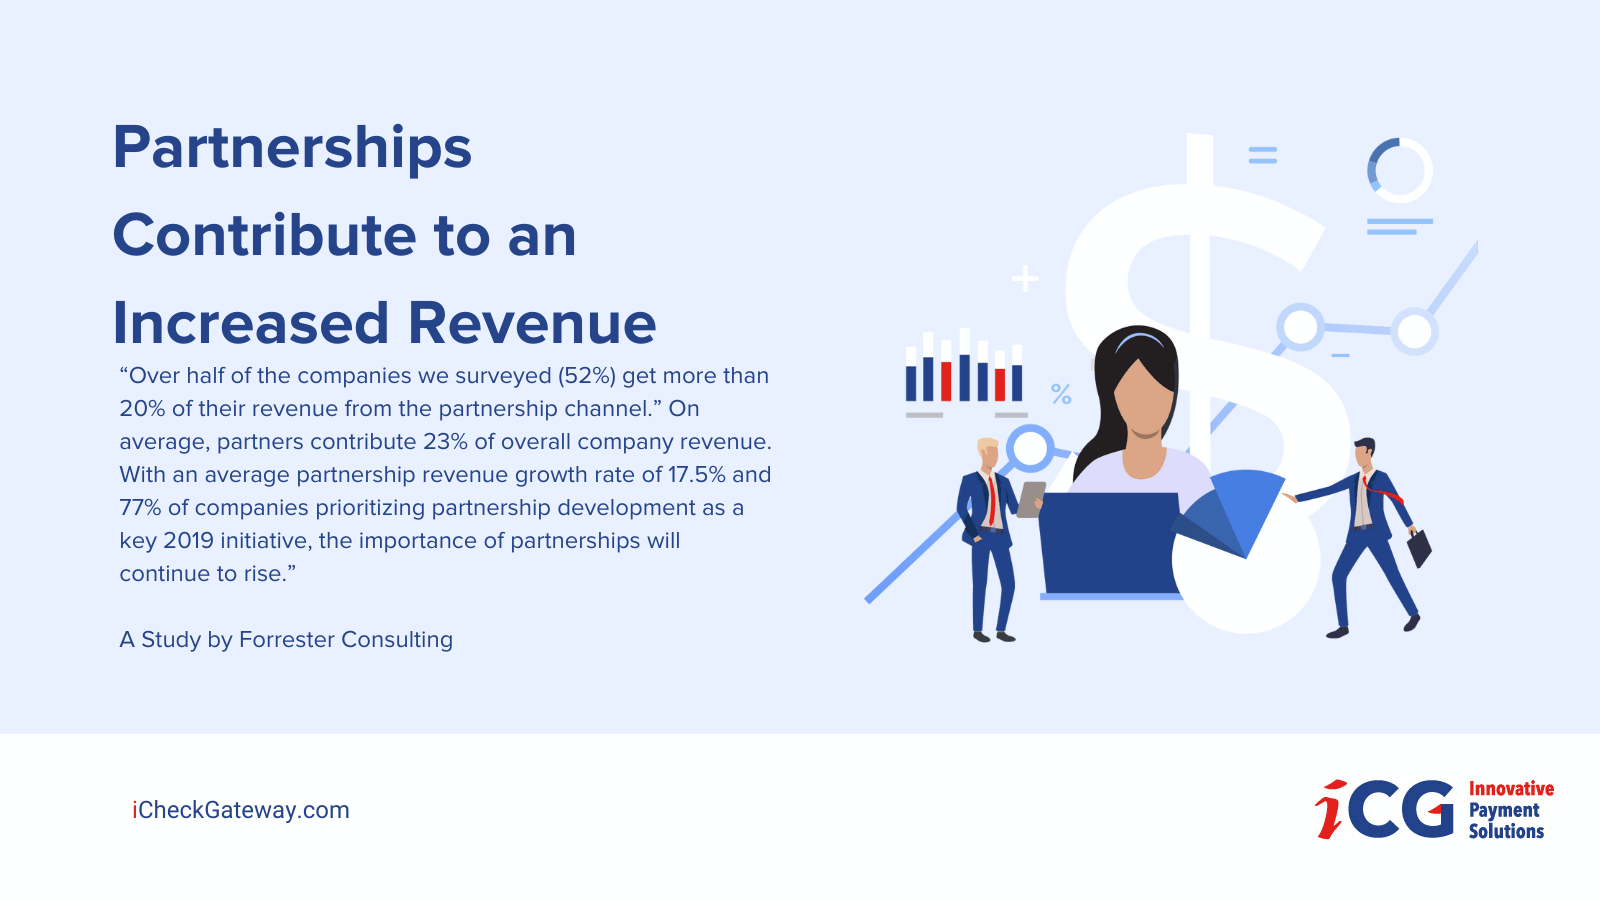 “Over half of the companies we surveyed (52%) get more than 20% of their revenue from the partnership channel.” On average, partners contribute 23% of overall company revenue. With an average partnership revenue growth rate of 17.5% and 77% of companies prioritizing partnership development as a key 2019 initiative, the importance of partnerships will continue to rise.”  A Study by Forrester Consulting